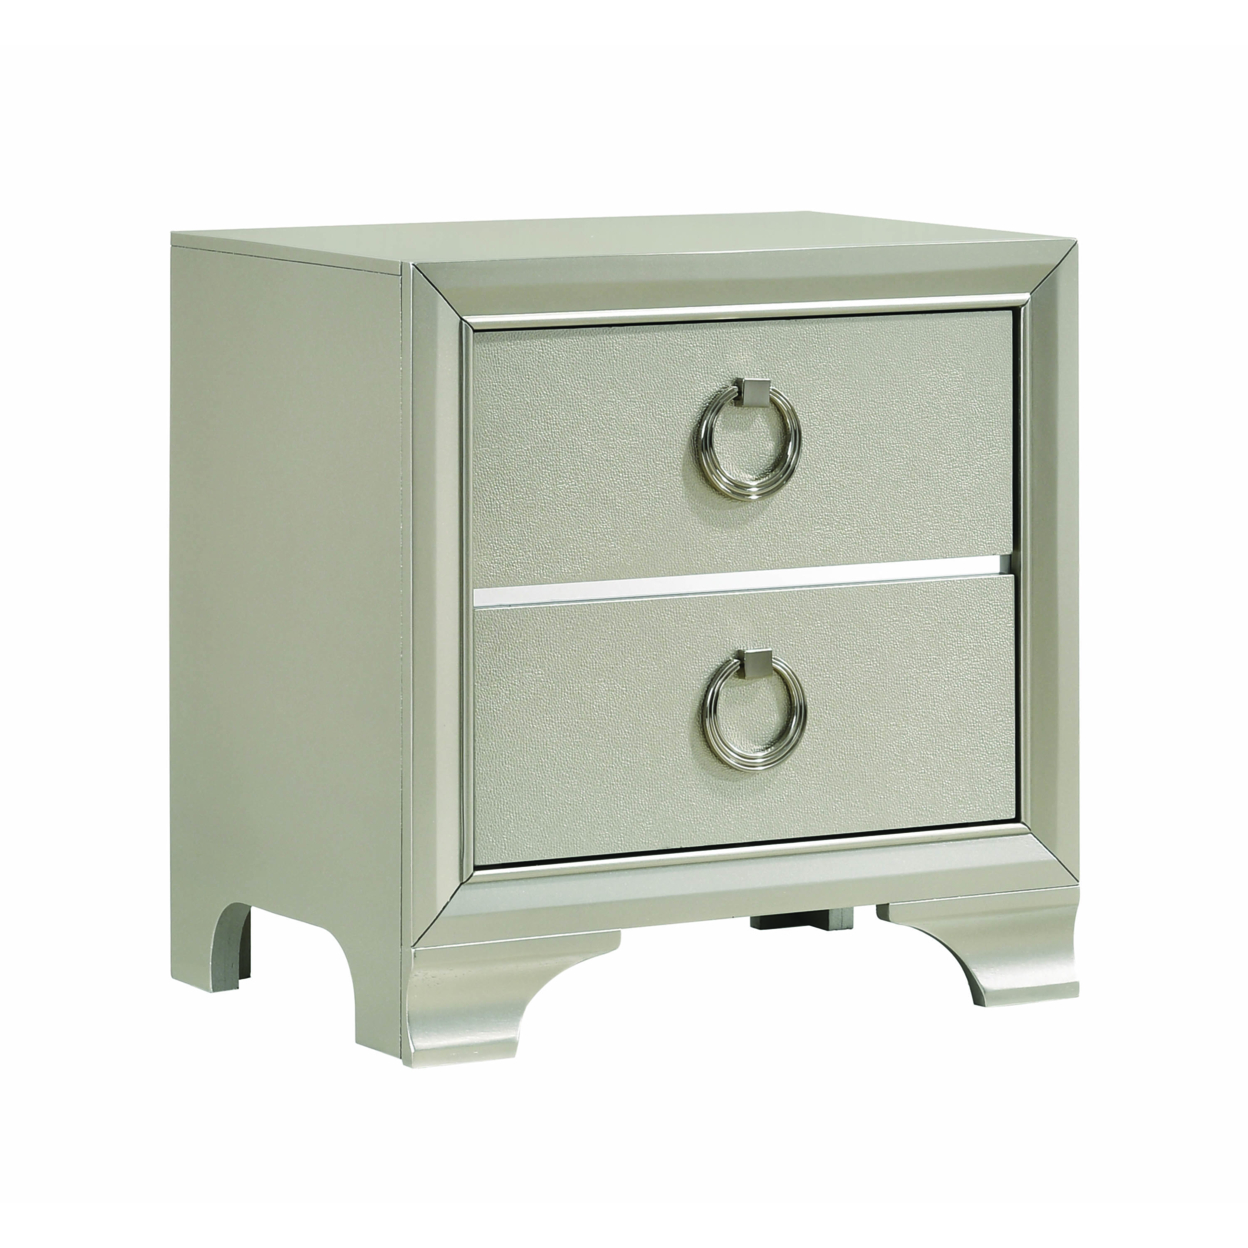 Two Drawers Wooden Nightstand With Oversized Ring Handles, Silver- Saltoro Sherpi